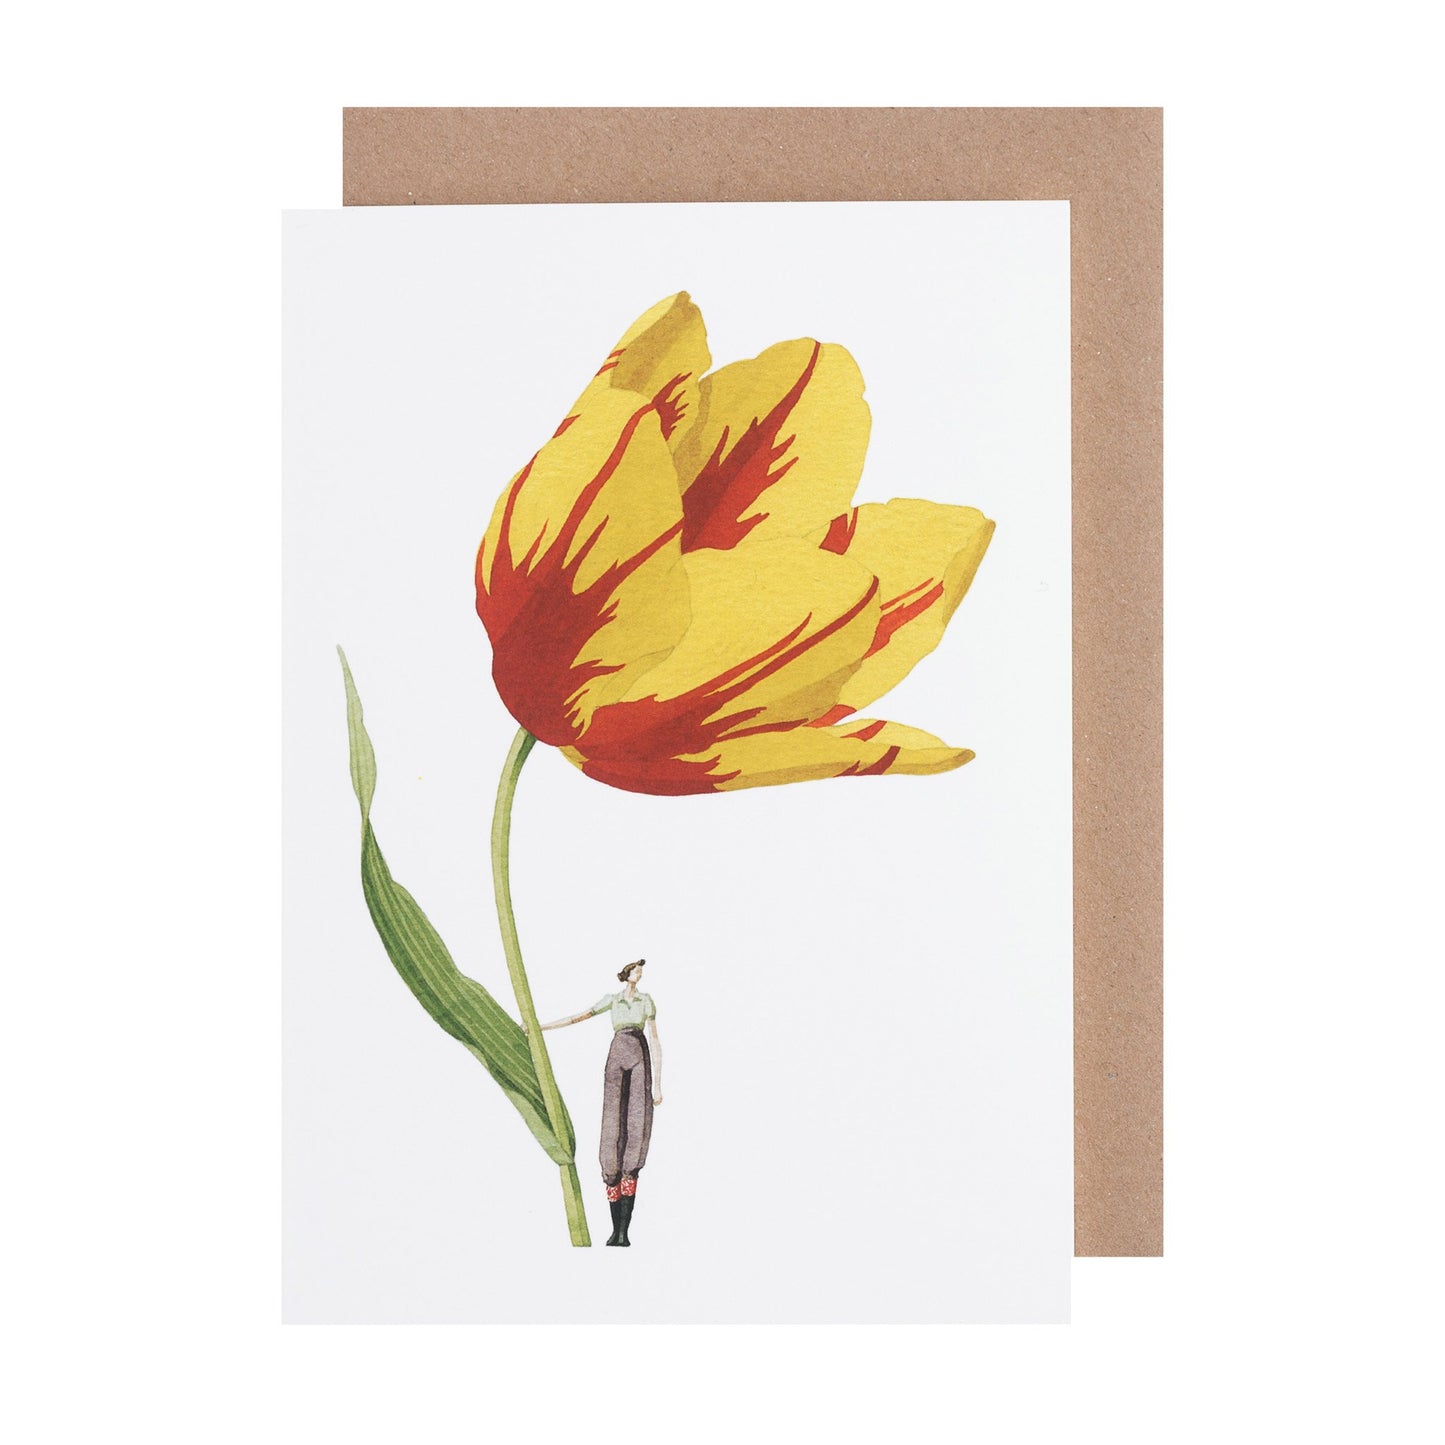 environmentally sustainable paper, compostable packaging, recycled paper, made in england, illustration, tulip, flowers